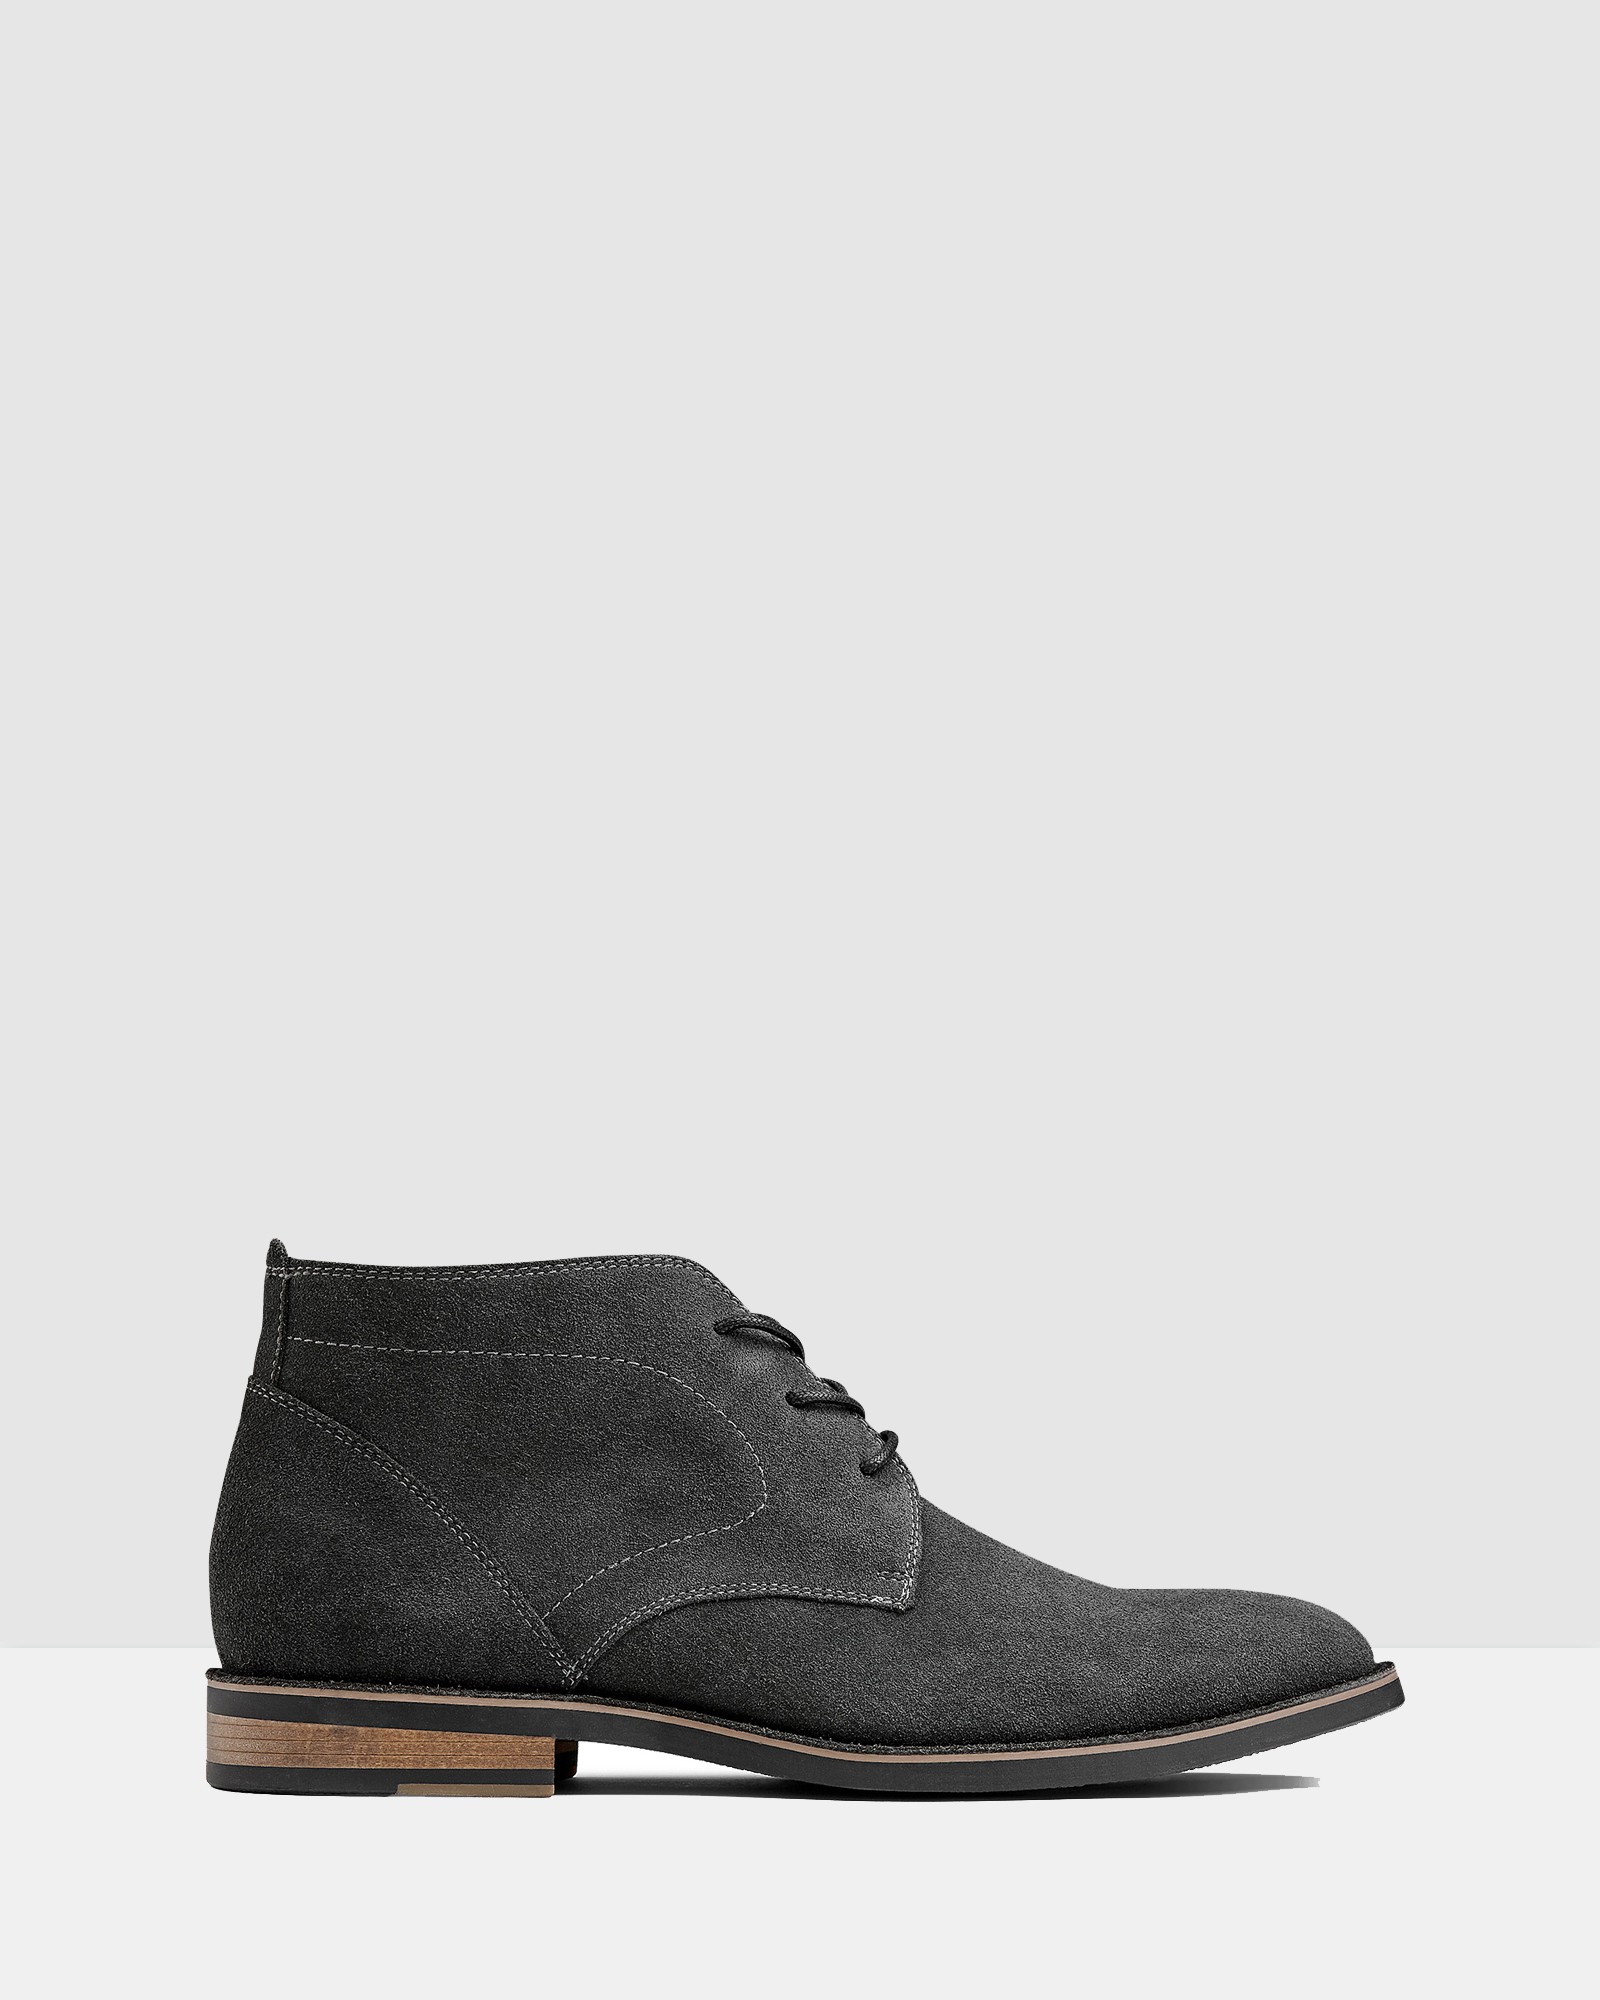 Delaney Desert Boots Charcoal by Aq By Aquila | ShoeSales